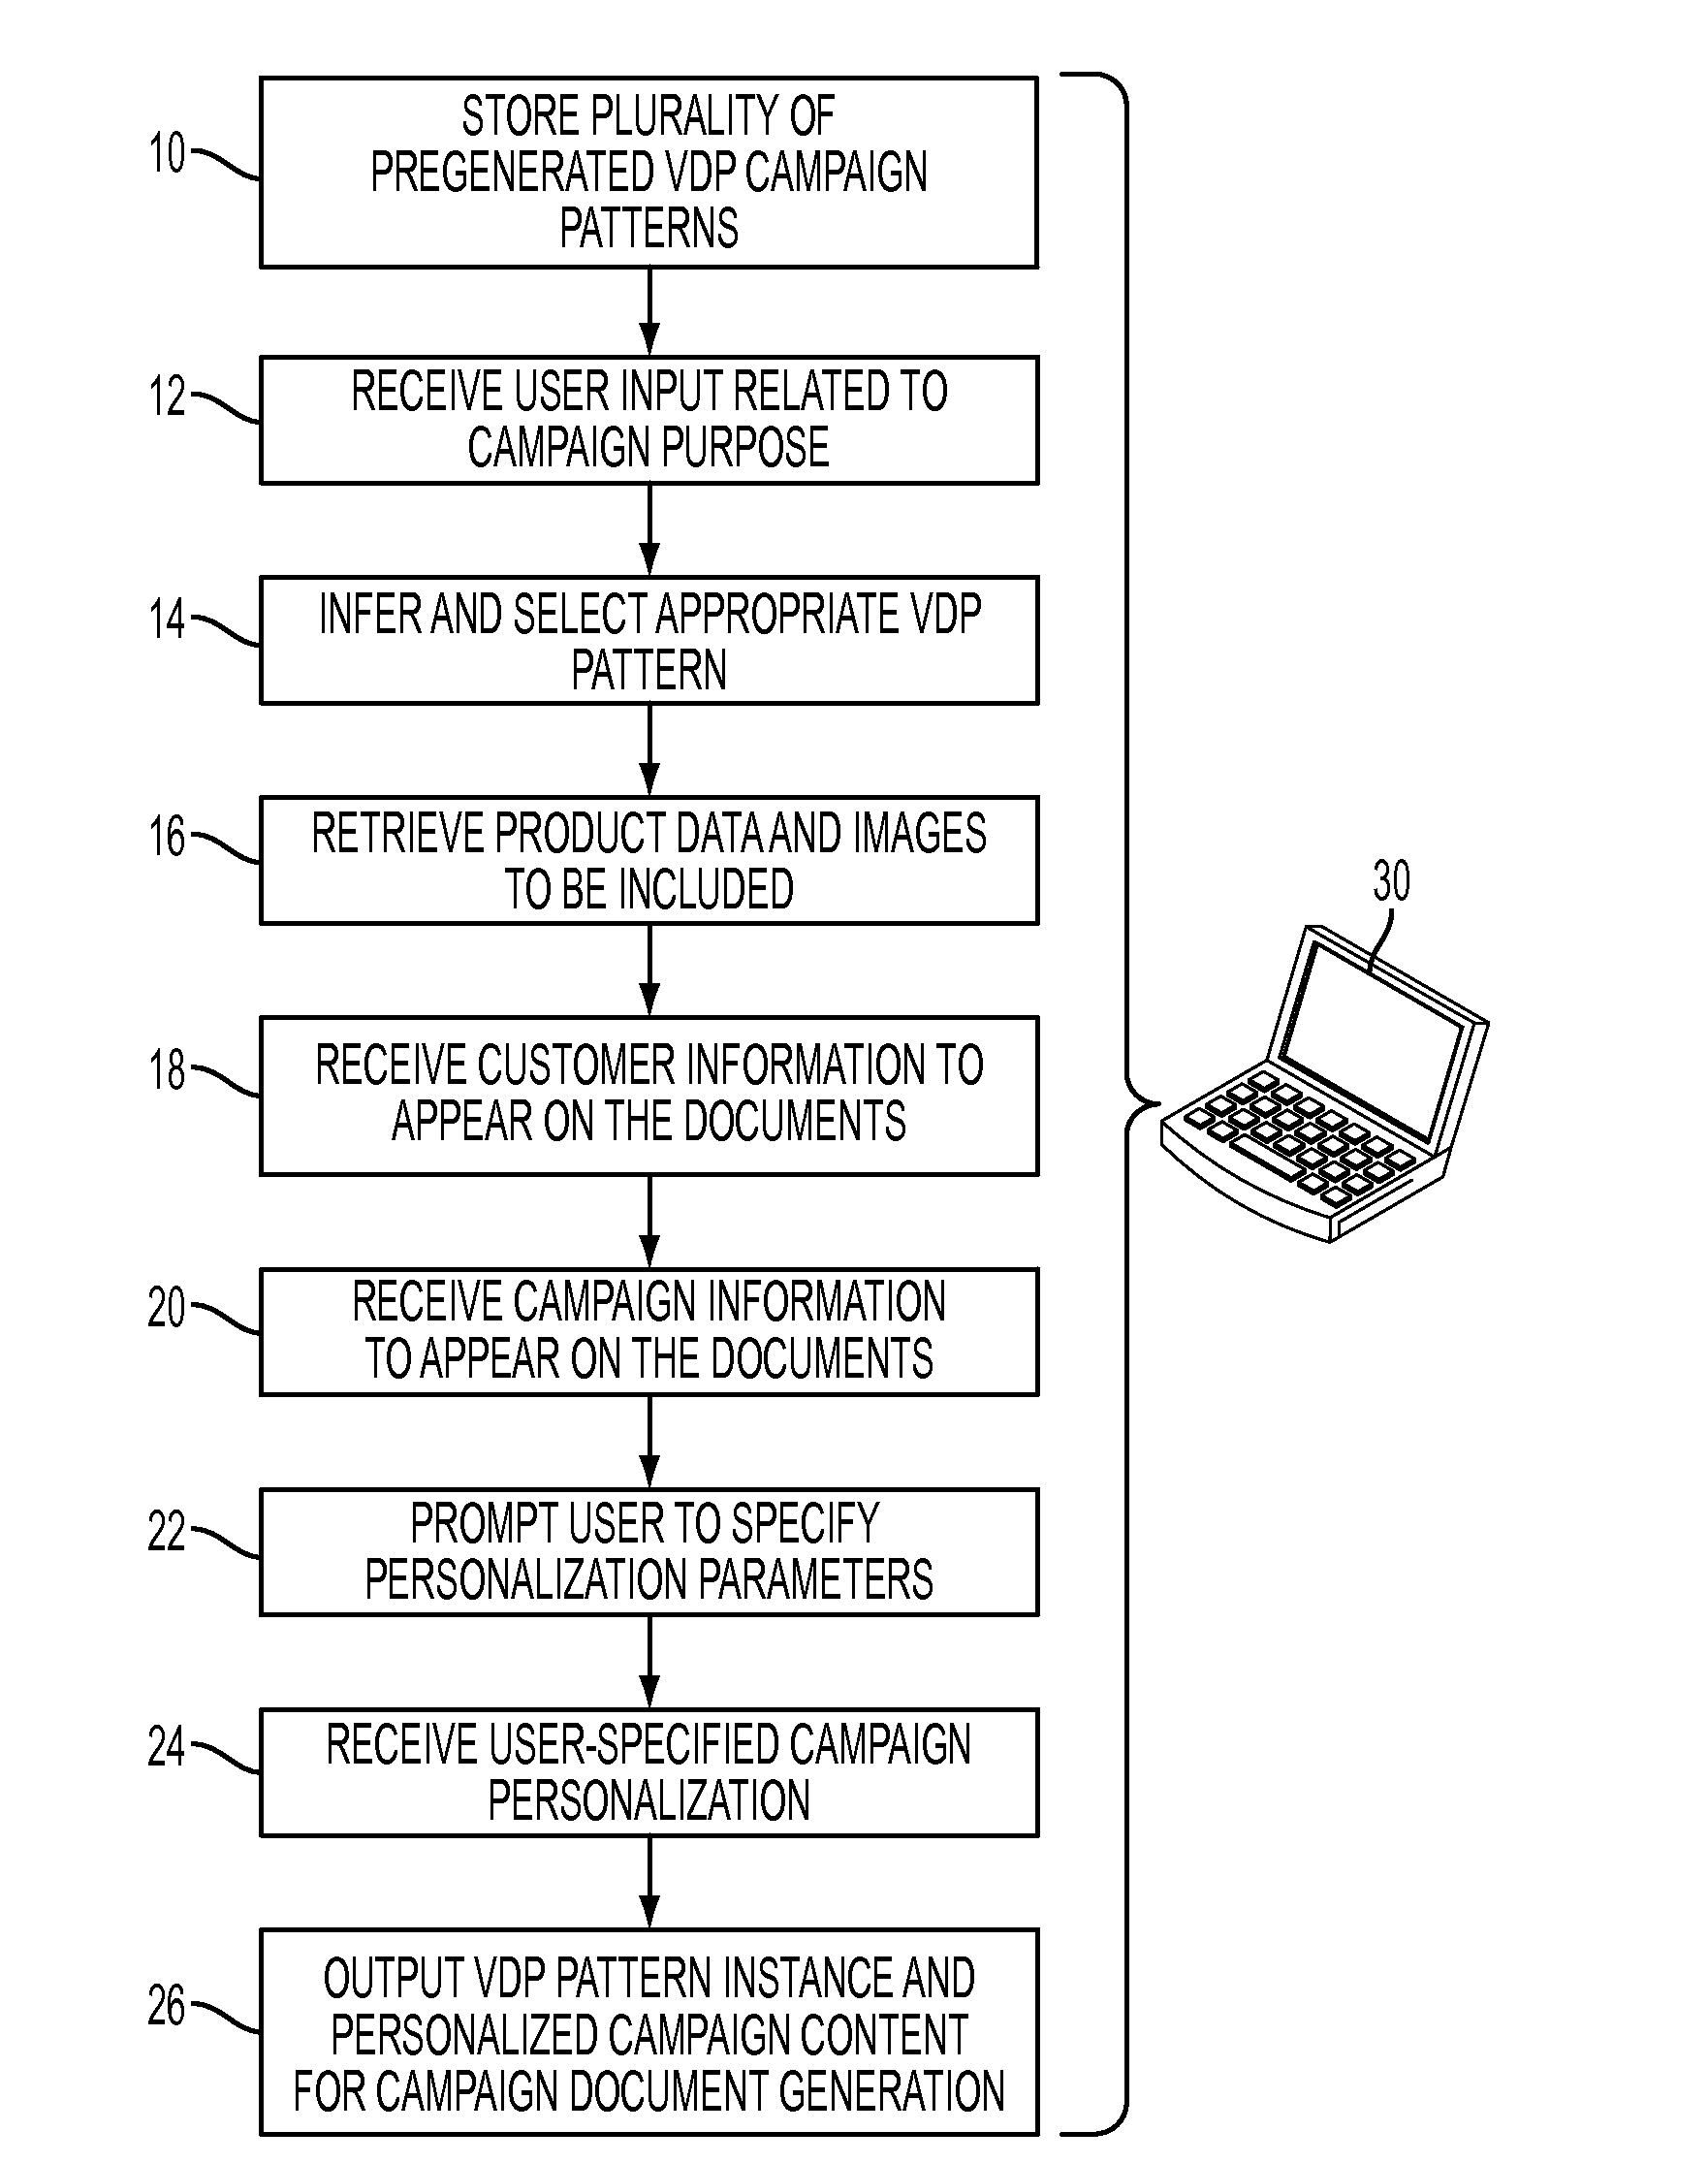 Method for automatically visualizing and describing the logic of a variable-data campaign